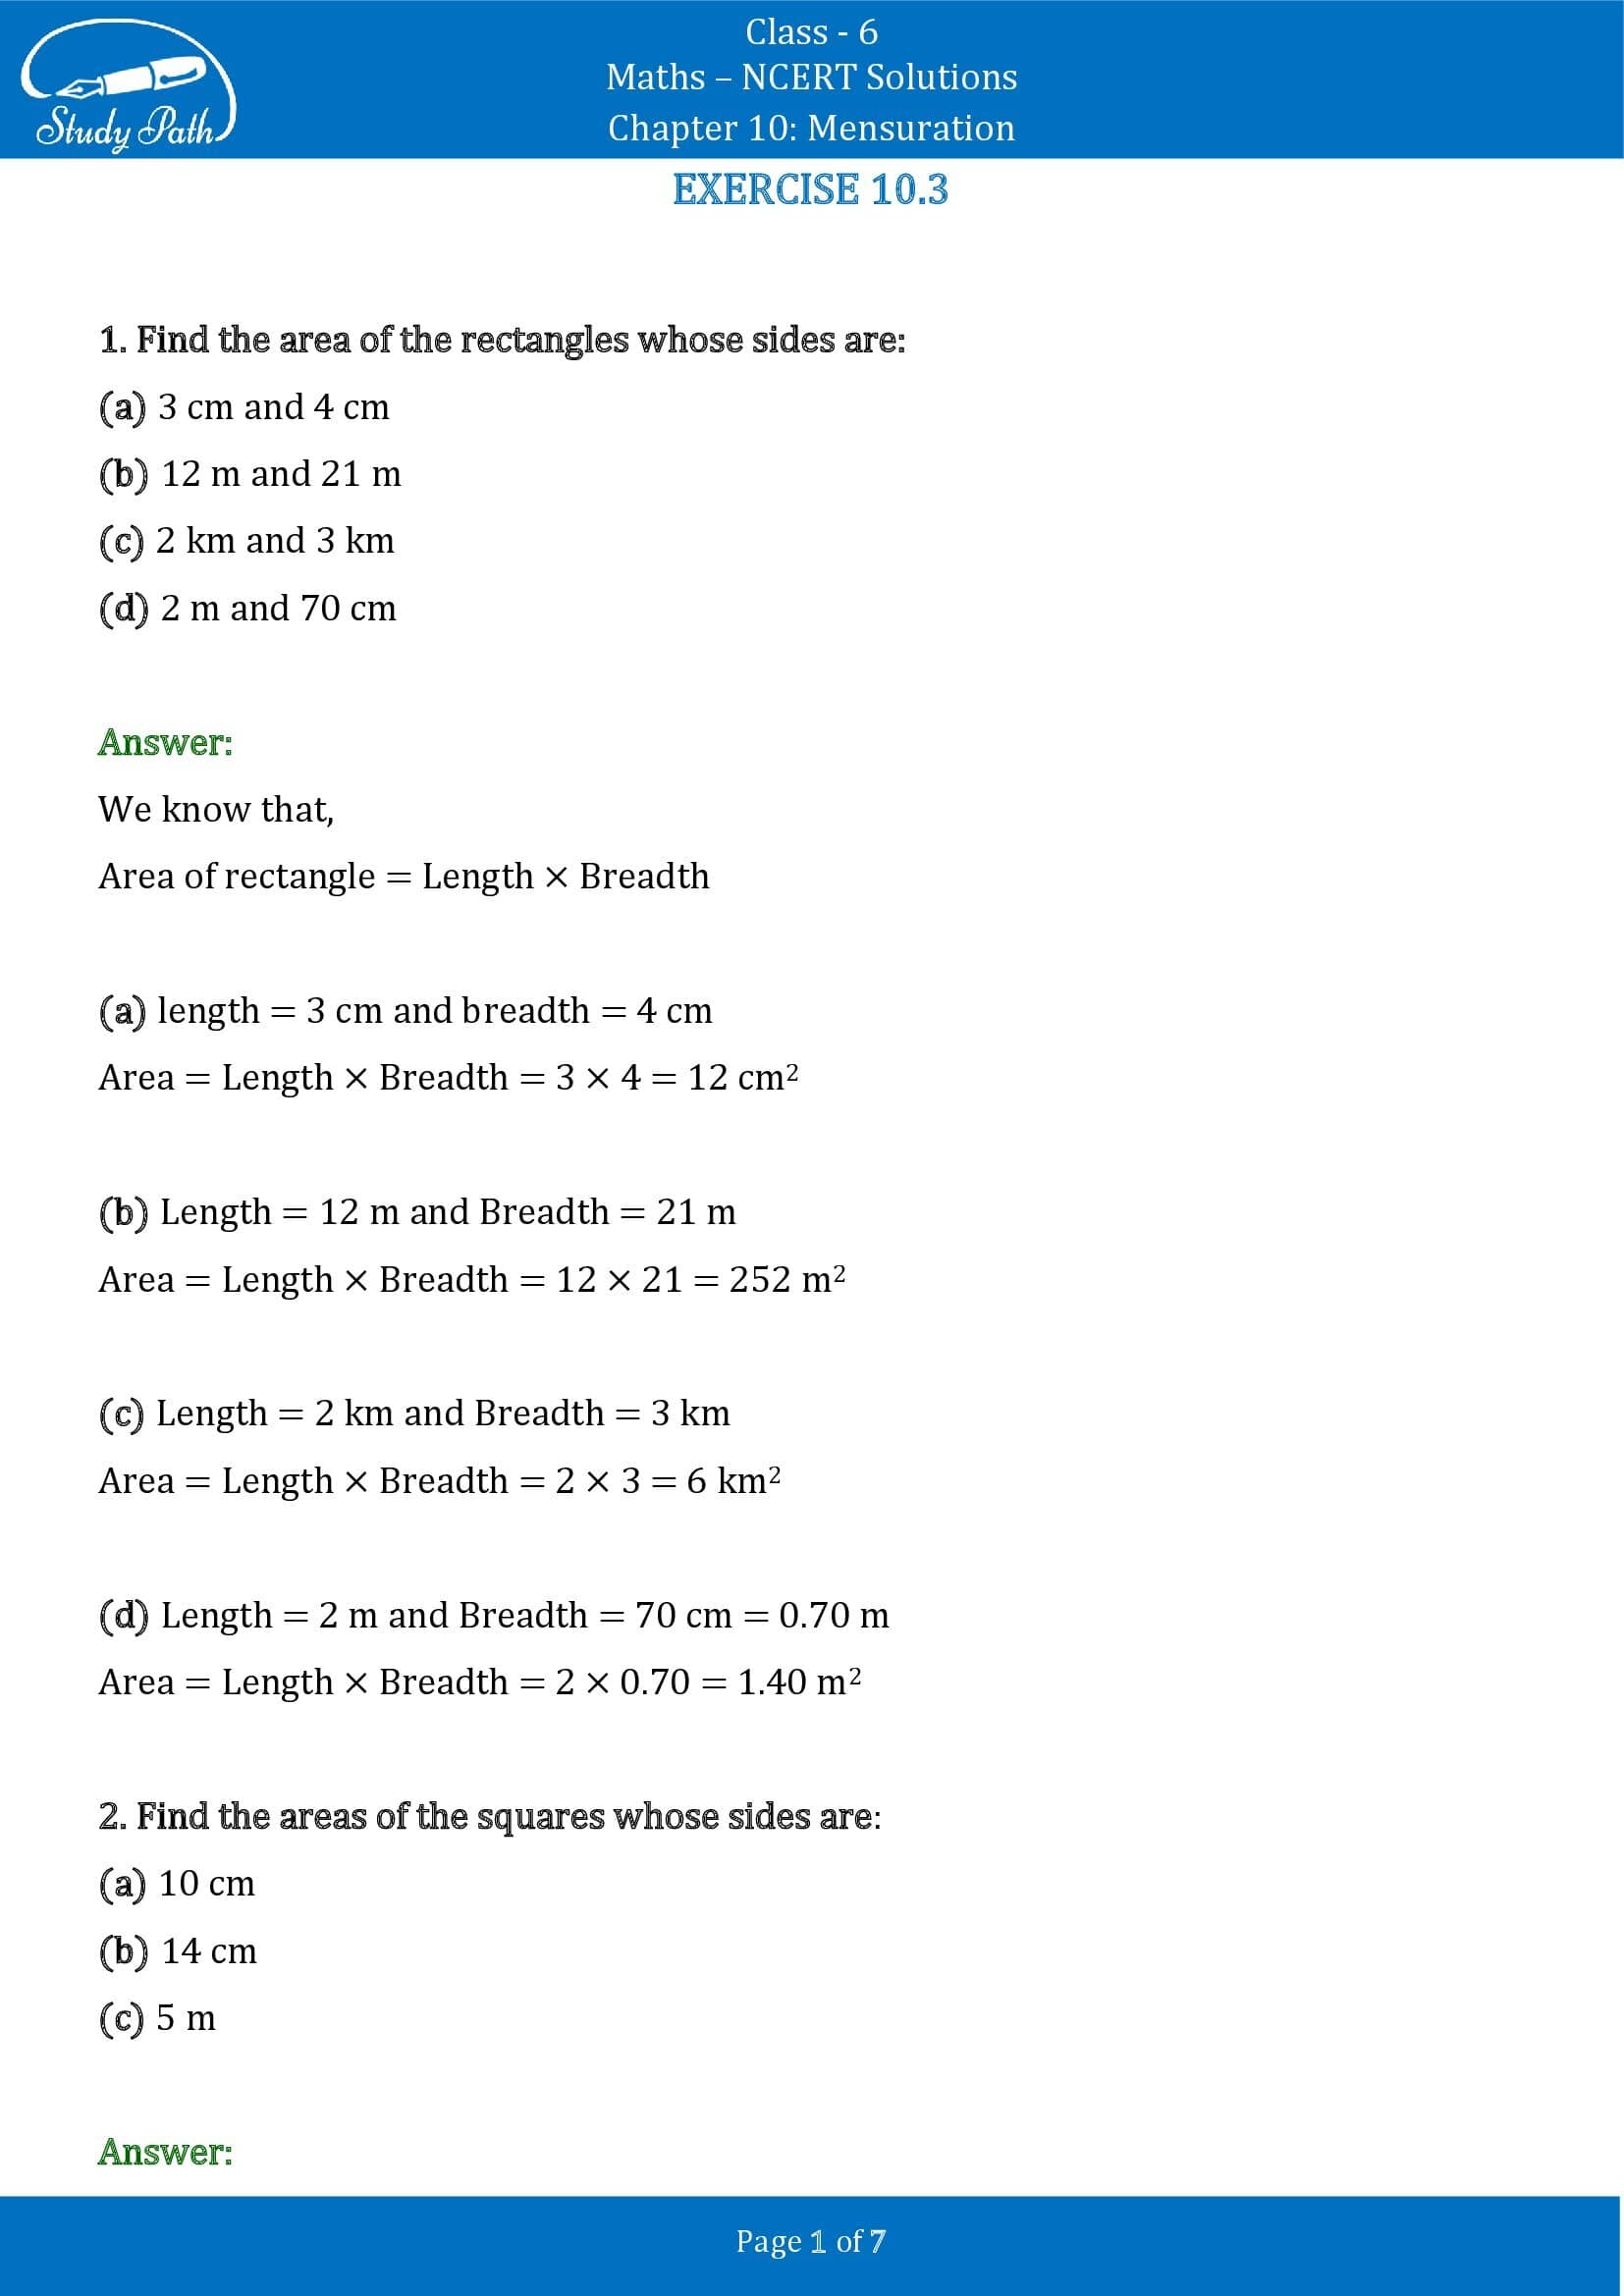 NCERT Solutions for Class 6 Maths Chapter 10 Mensuration Exercise 10.3 00001